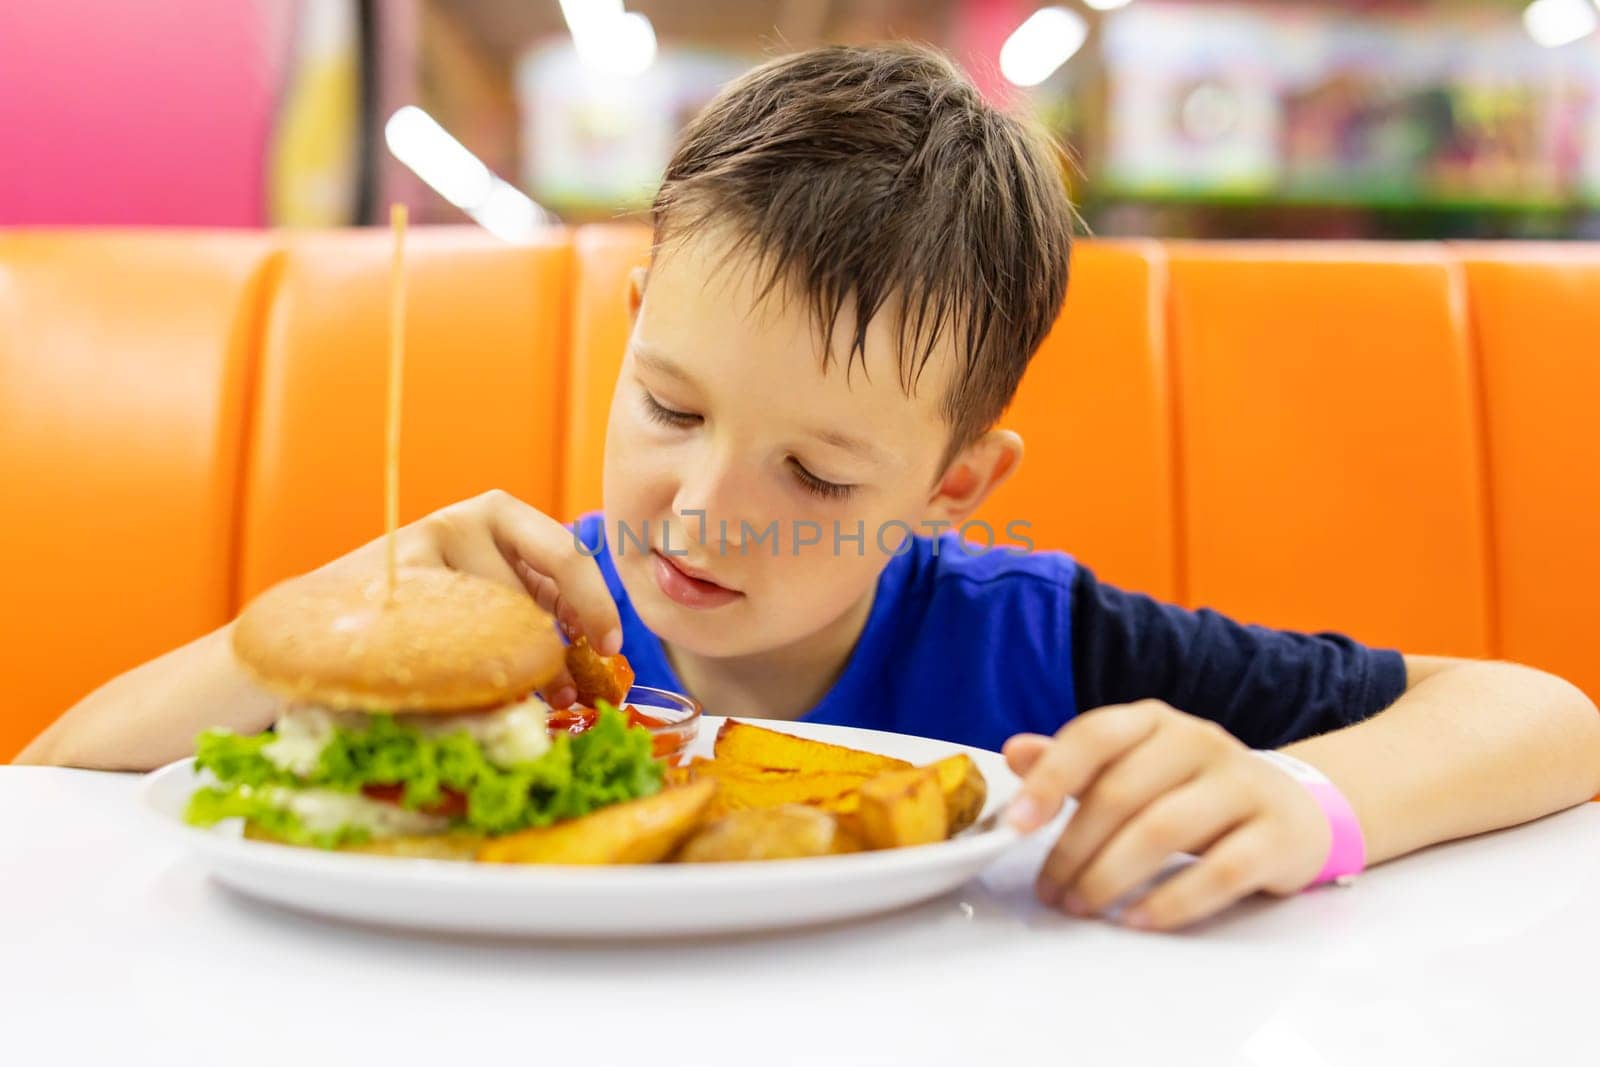 Child eating hamburger and French fries in a fast food restaurant. Child dipping a fried chip into tomato sauce